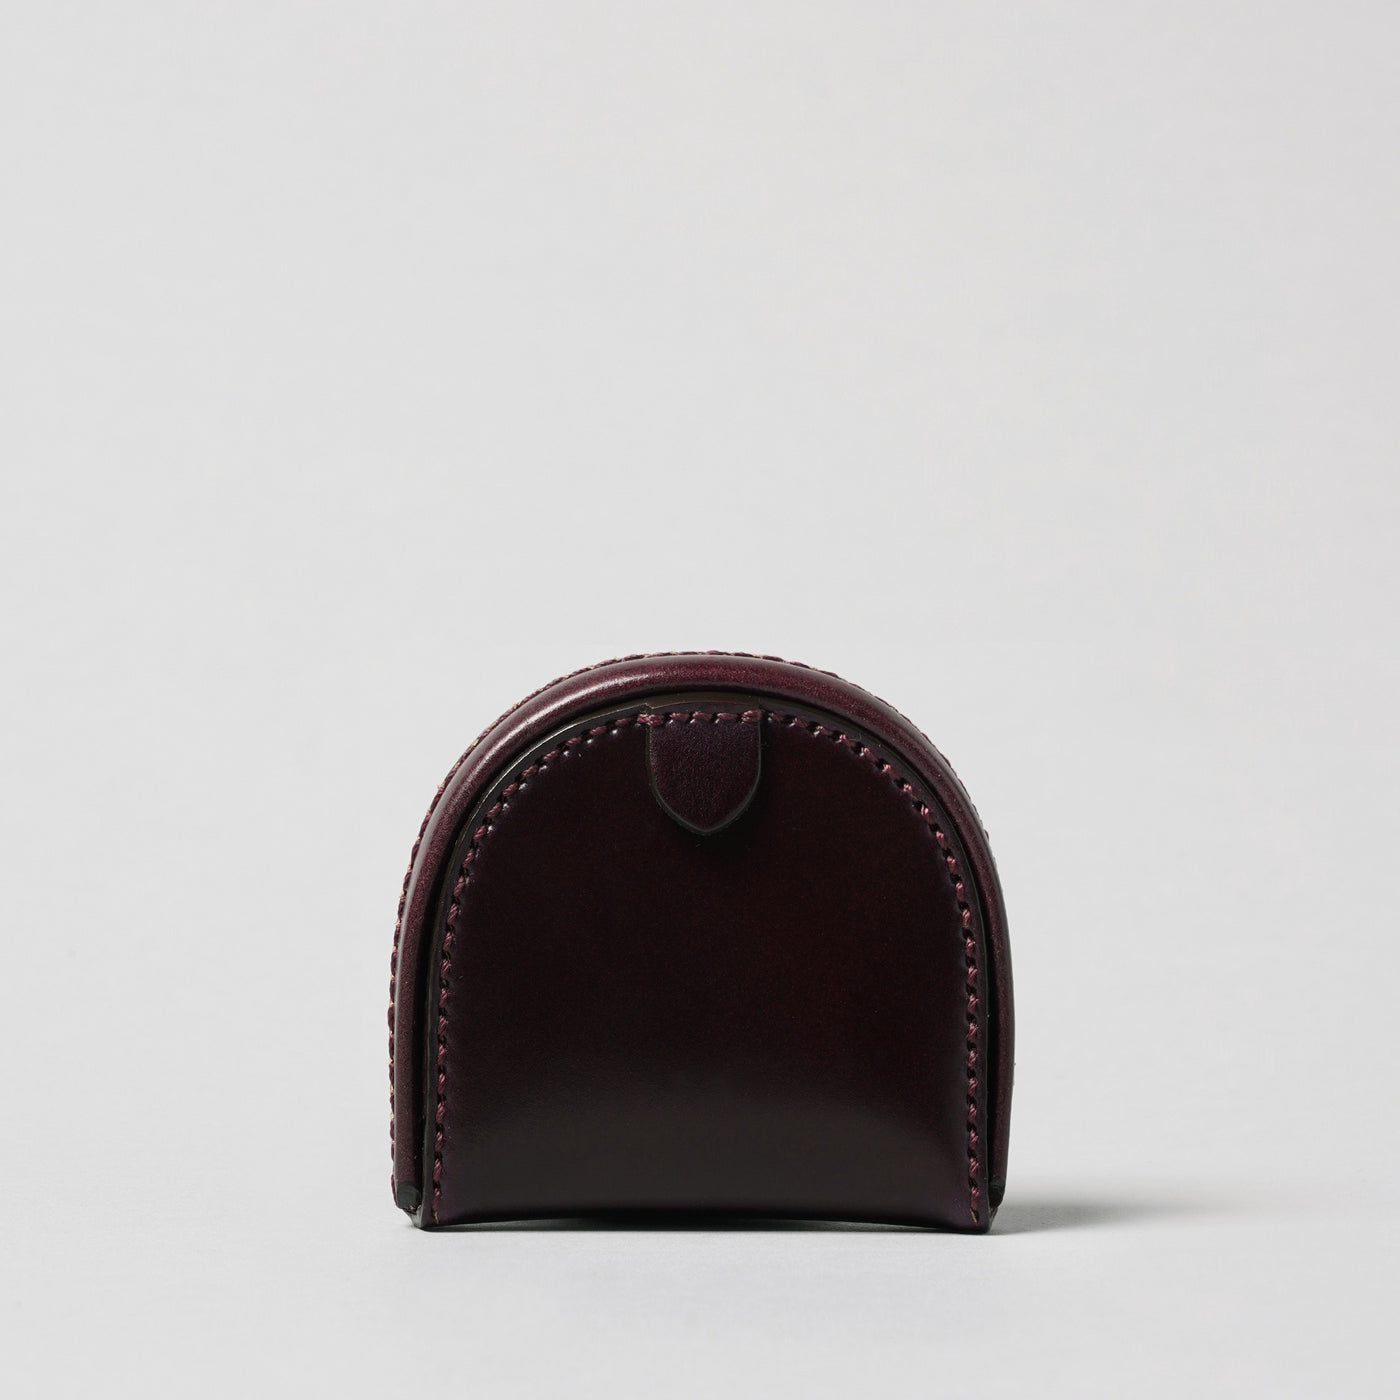 <Hawk Feathers>  Cordovan Horseshoe Shaped Coin Case / Green